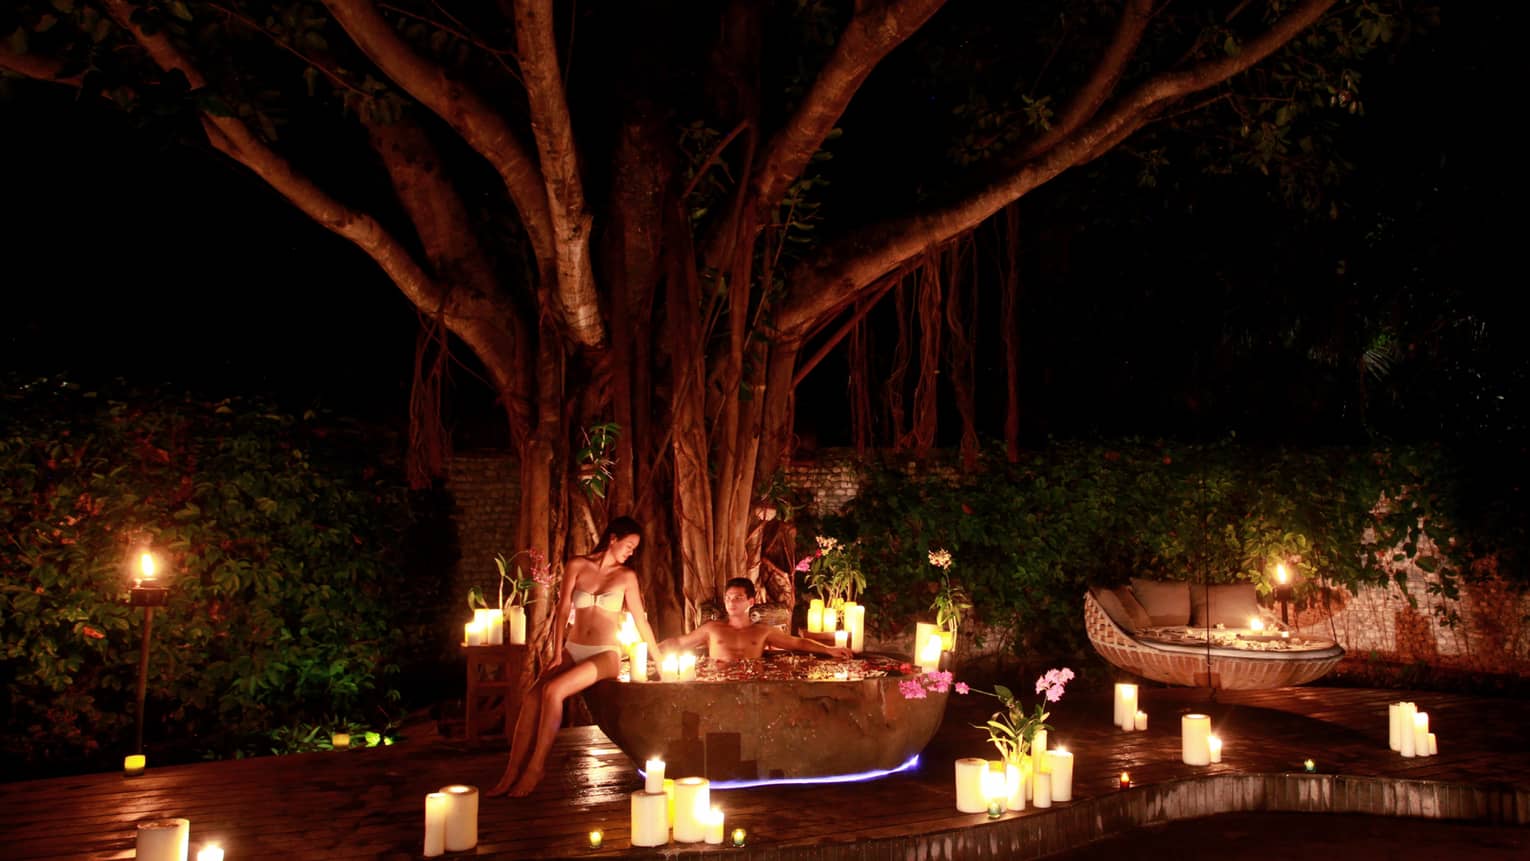 Man in outdoor whirlpool tub at night, woman in bikini on edge, surrounded by lit candles